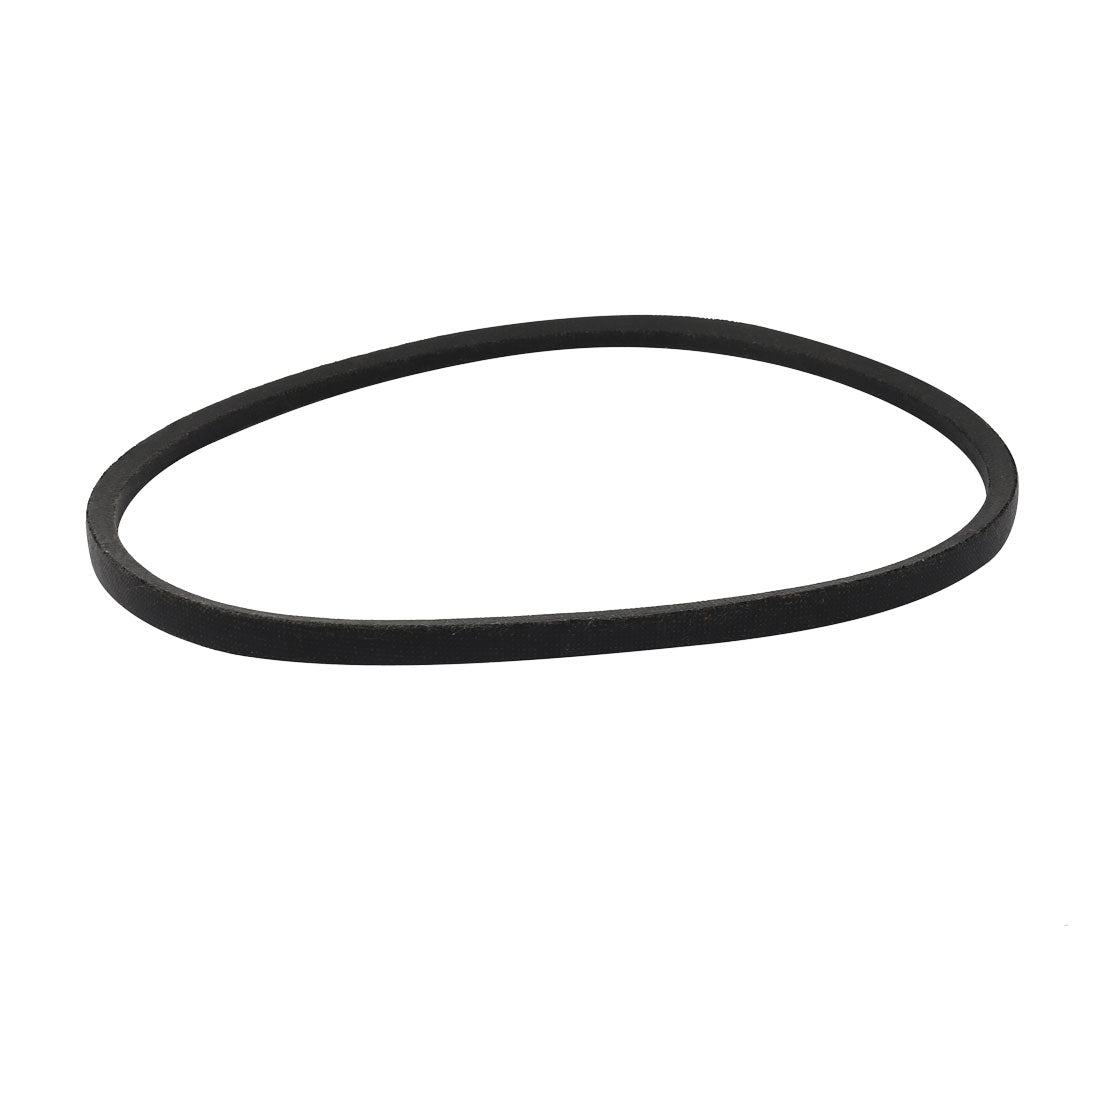 uxcell Uxcell O-580 Rubber Transmission Drive Belt V-Belt 9.6mm Wide 6mm Thick for Washing Machine